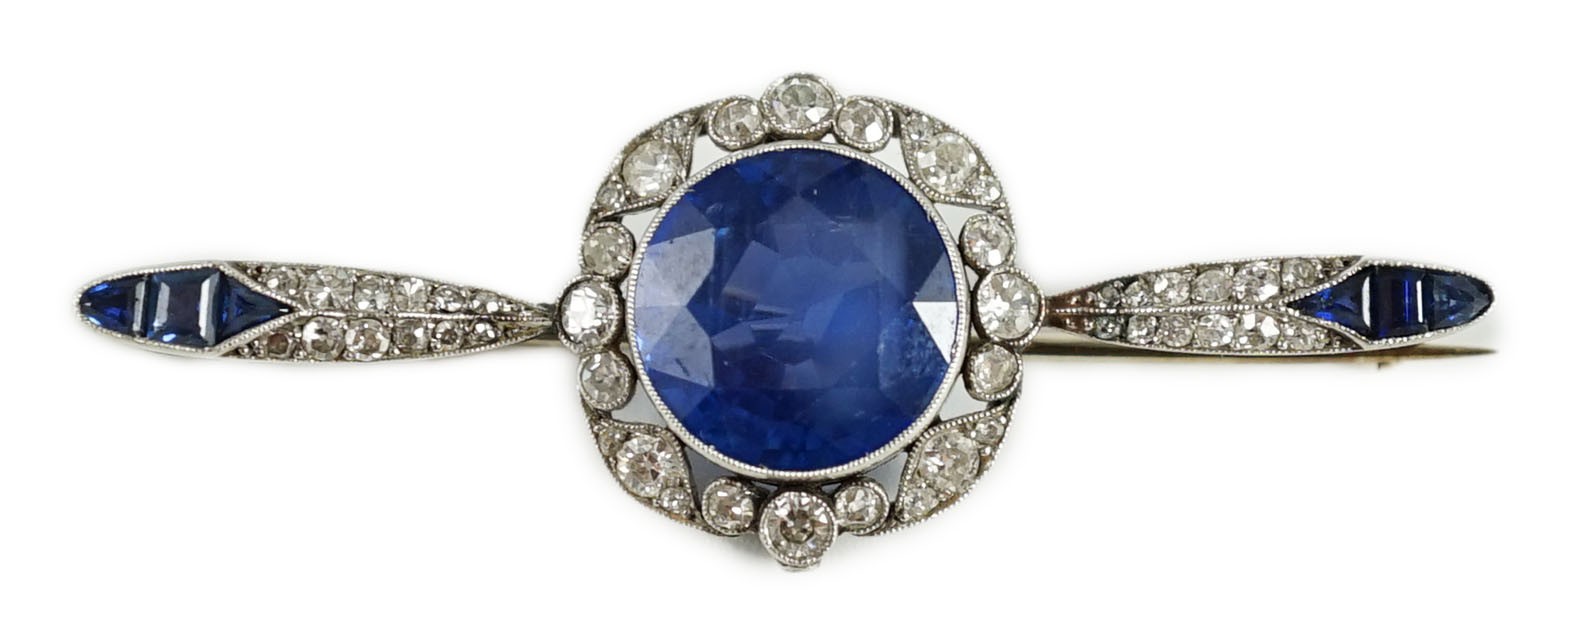 An early 20th century French platinum, sapphire and diamond bar brooch, the central round cut sapphire of good colour, with diamond border, flanked by diamonds and shaped cut sapphires